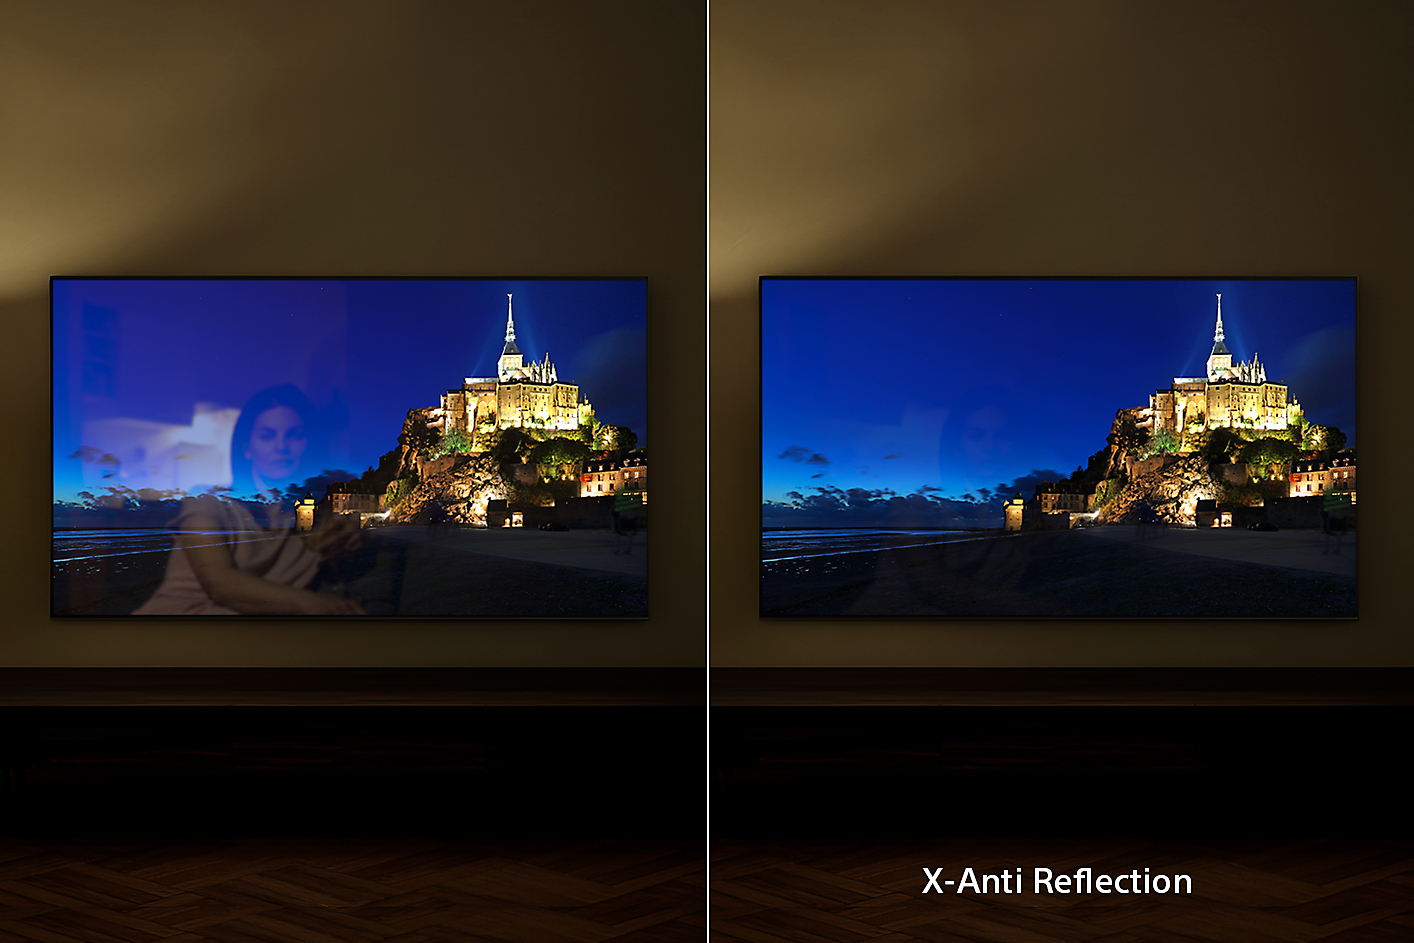 Two wall-mounted BRAVIA TVs with right image showing benefits of X-Anti Reflection